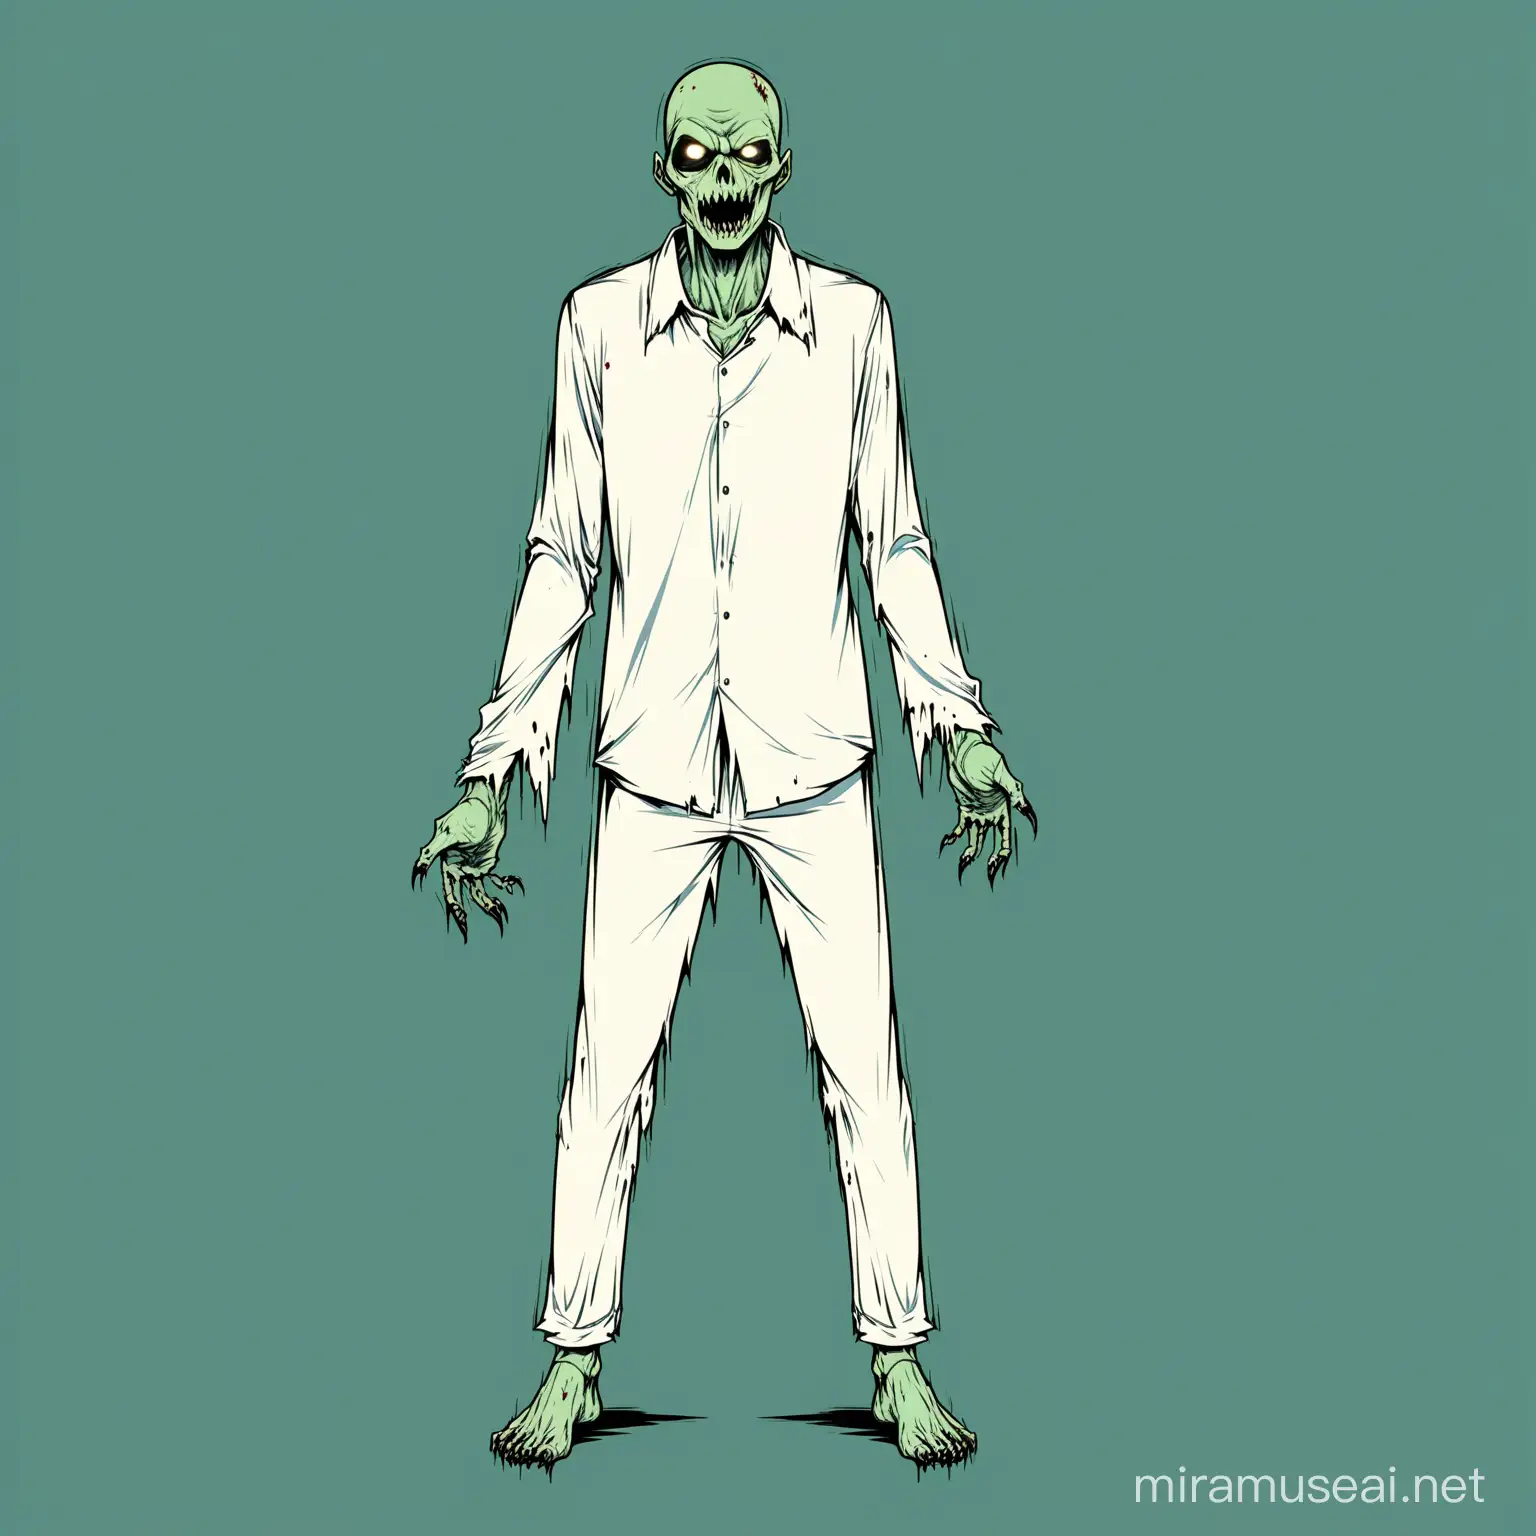 Spooky Zombie Ghost Man in Various Poses and Attire Vector Illustration